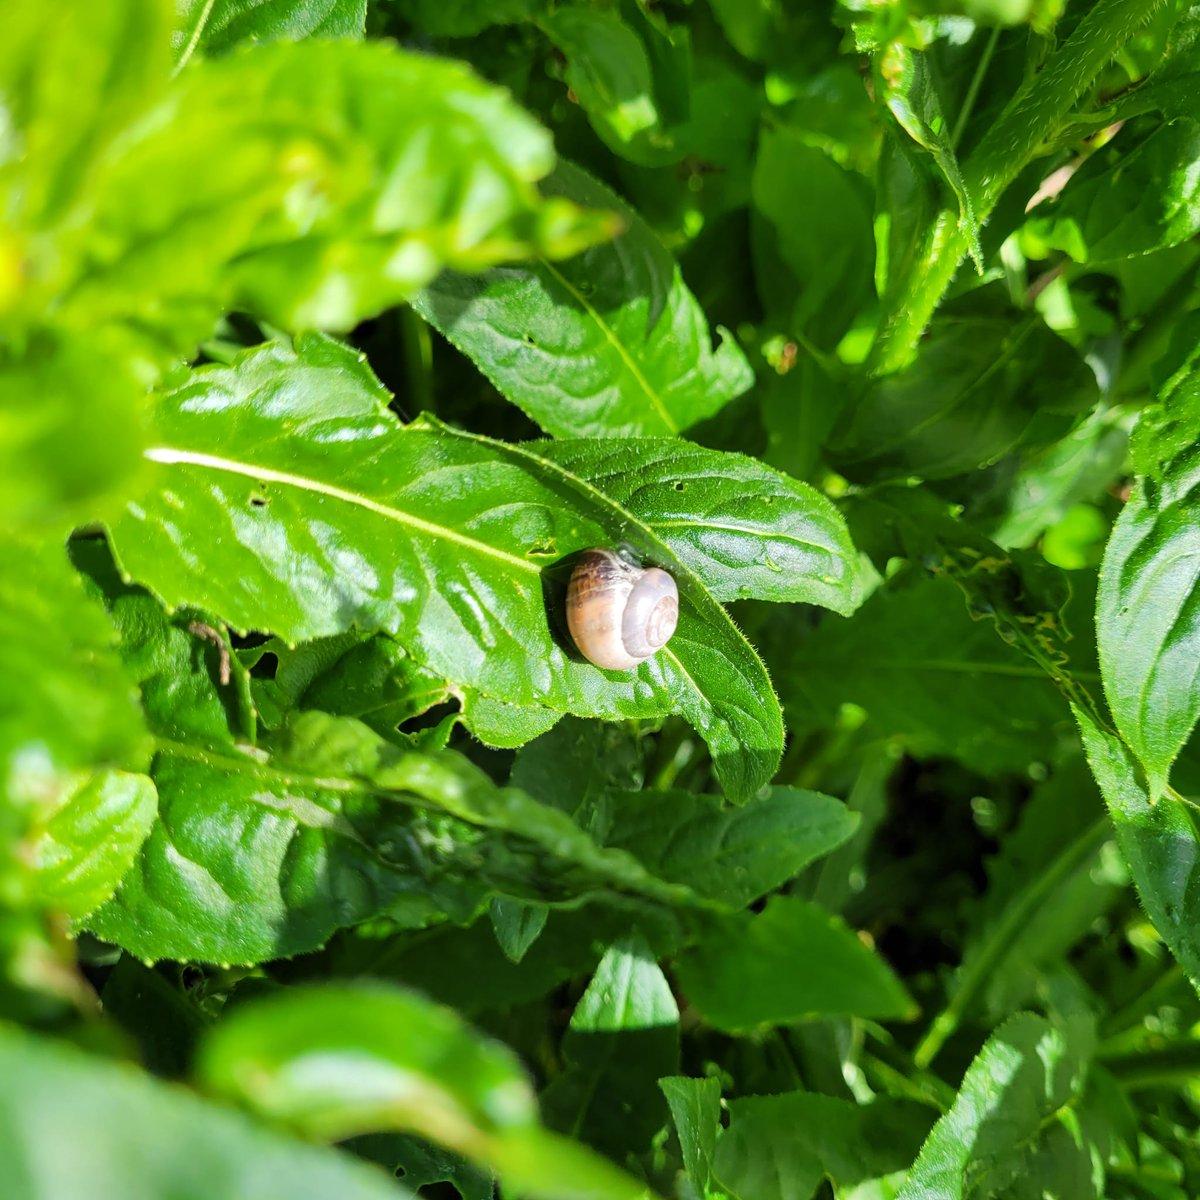 This snail has found a prime spot in the lakeside garden. #snails #greenleaves #spring